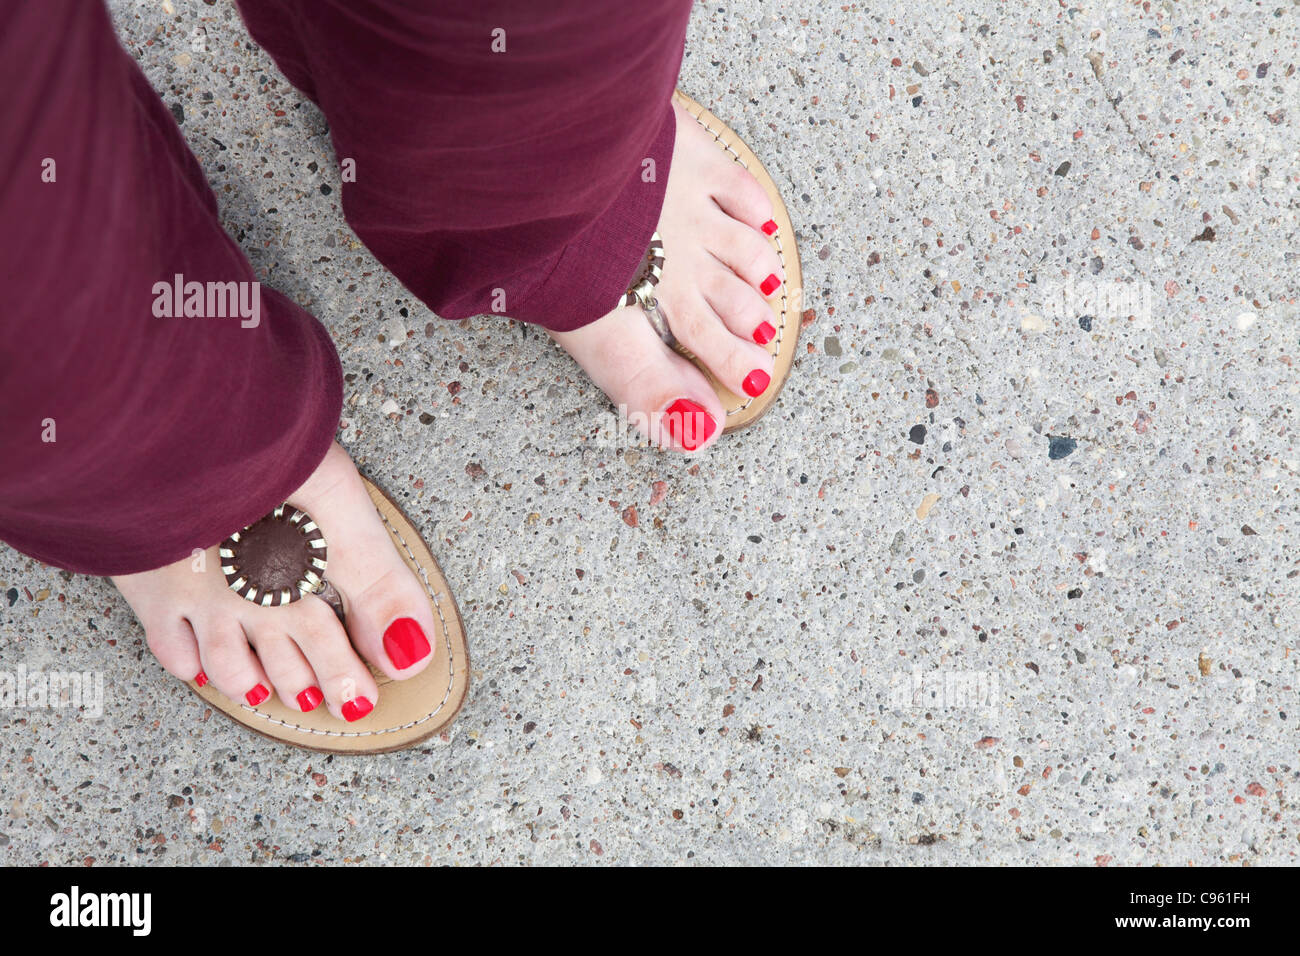 What Your Pedicurist Knows About You, Just From Looking At Your Feet |  HuffPost Life